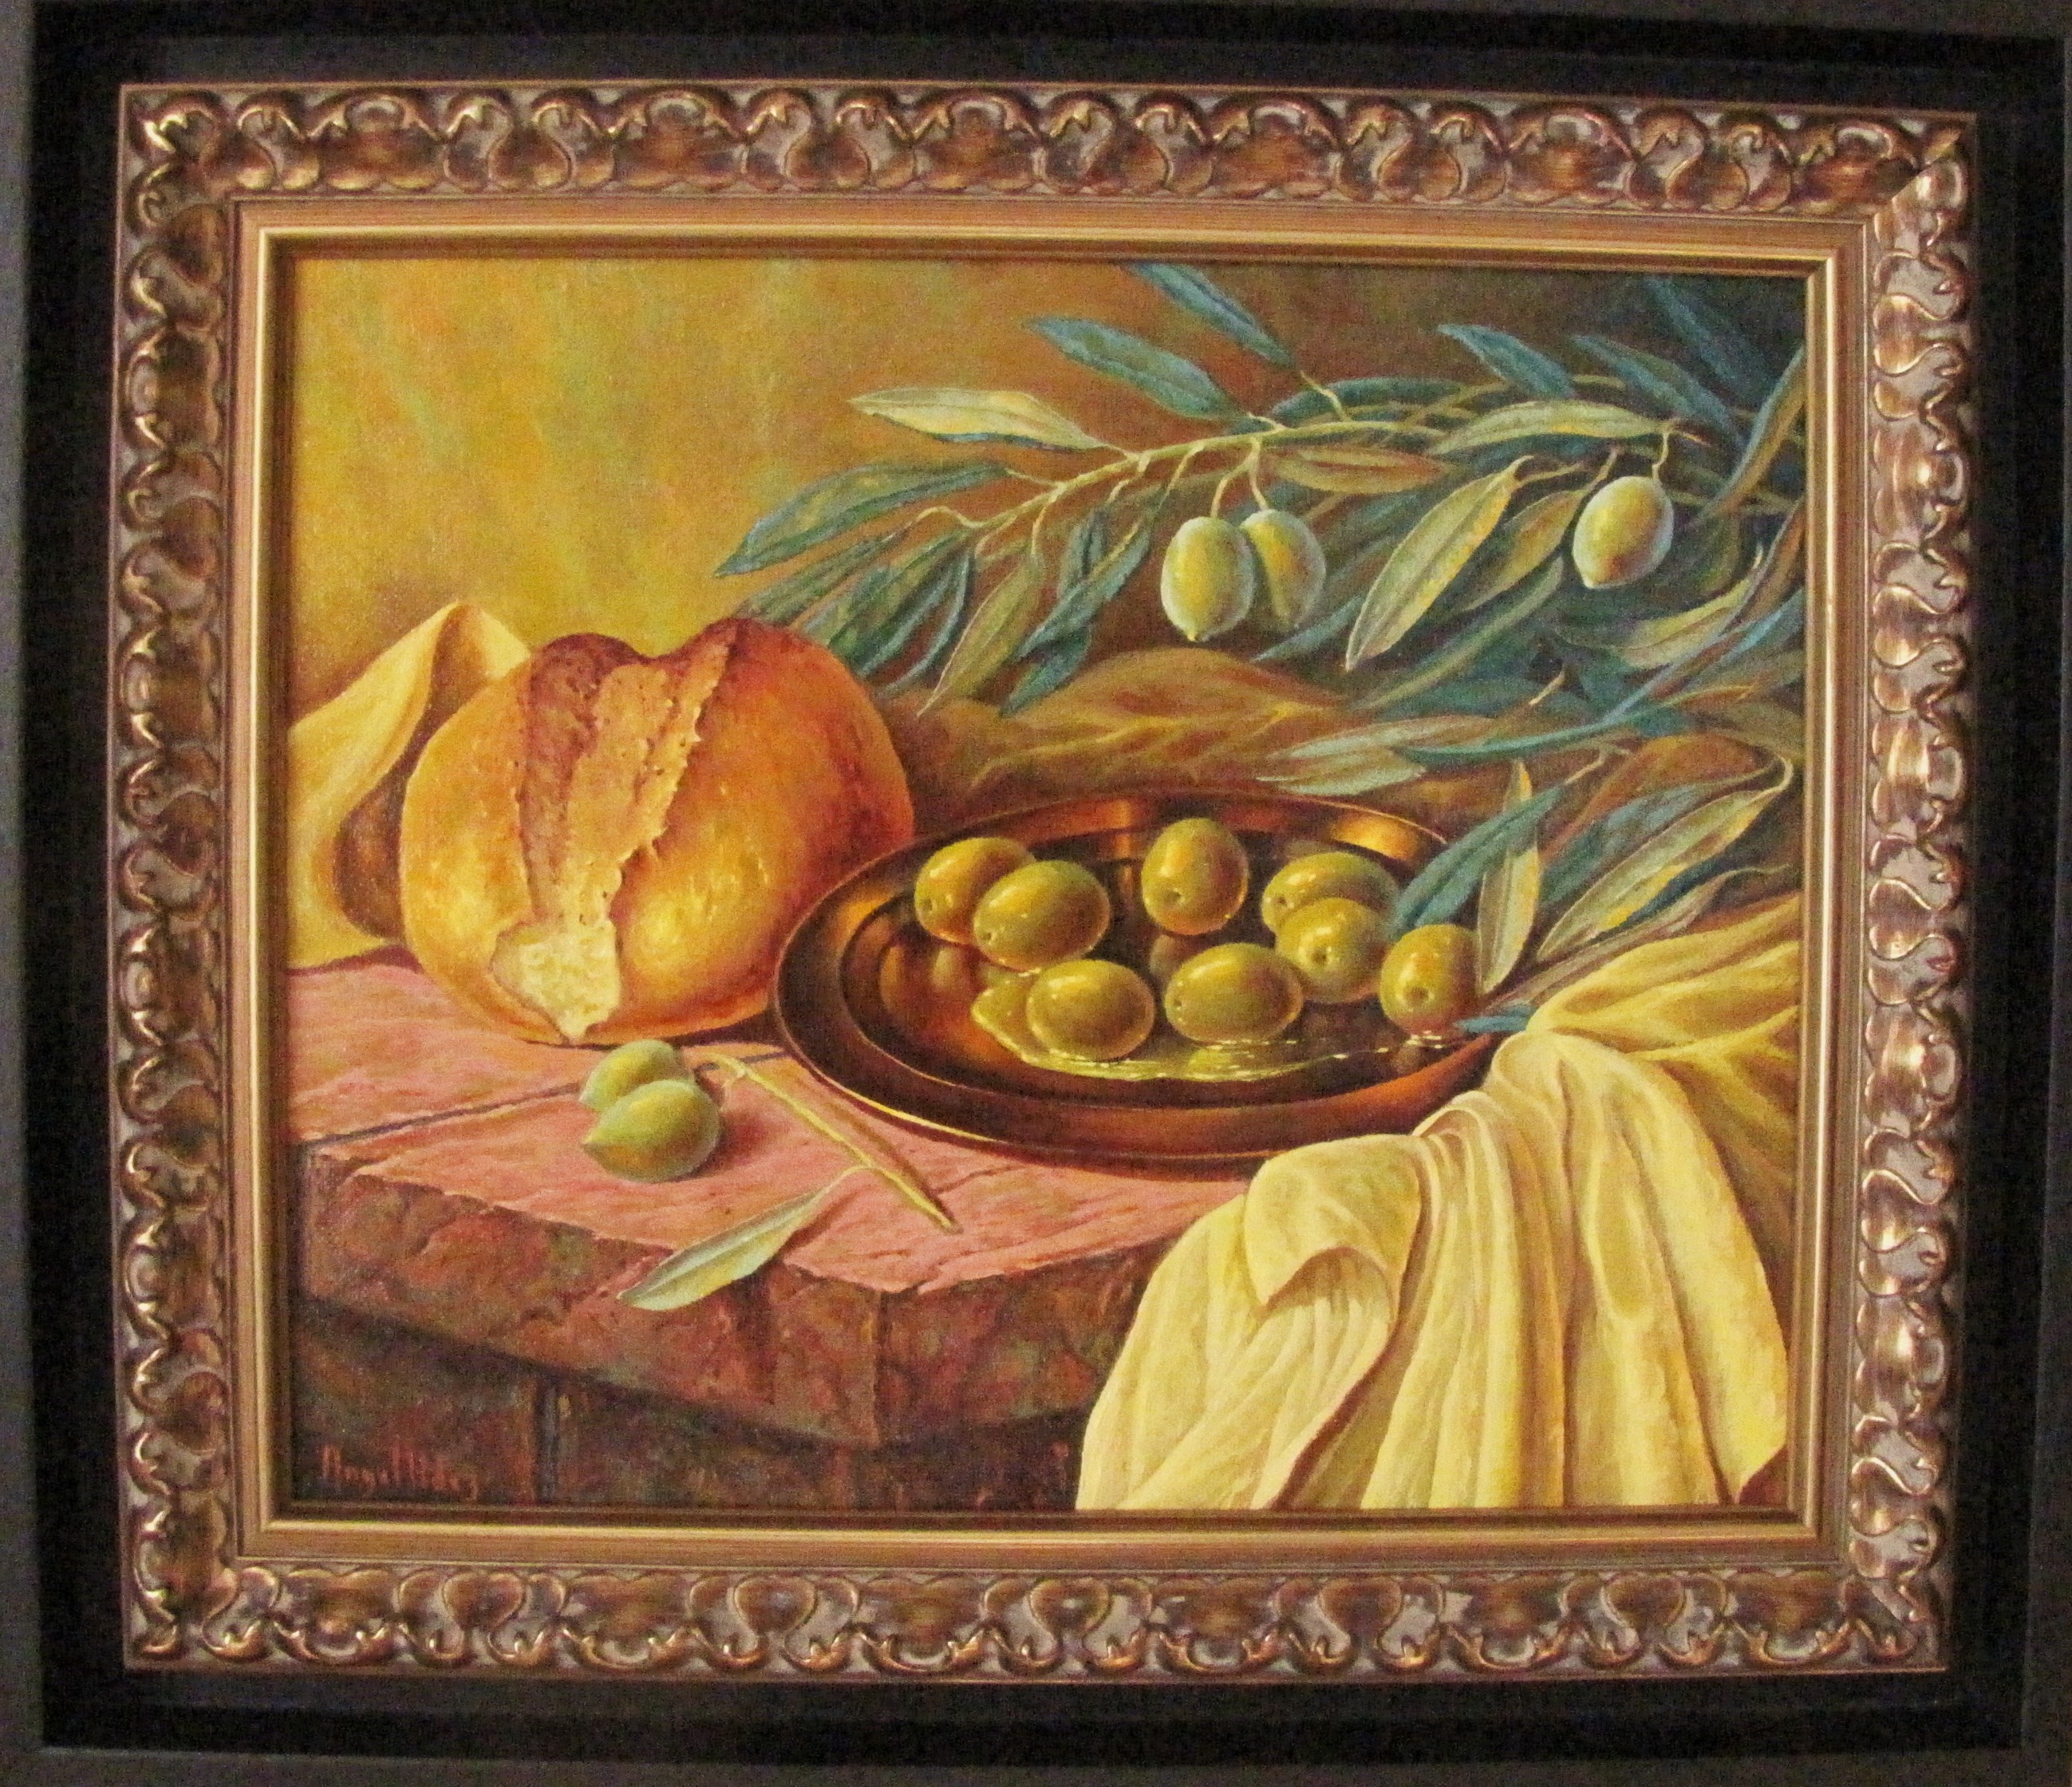 STILL LIFE WITH OLIVES, BREAD AND OLIVE BRANCHES